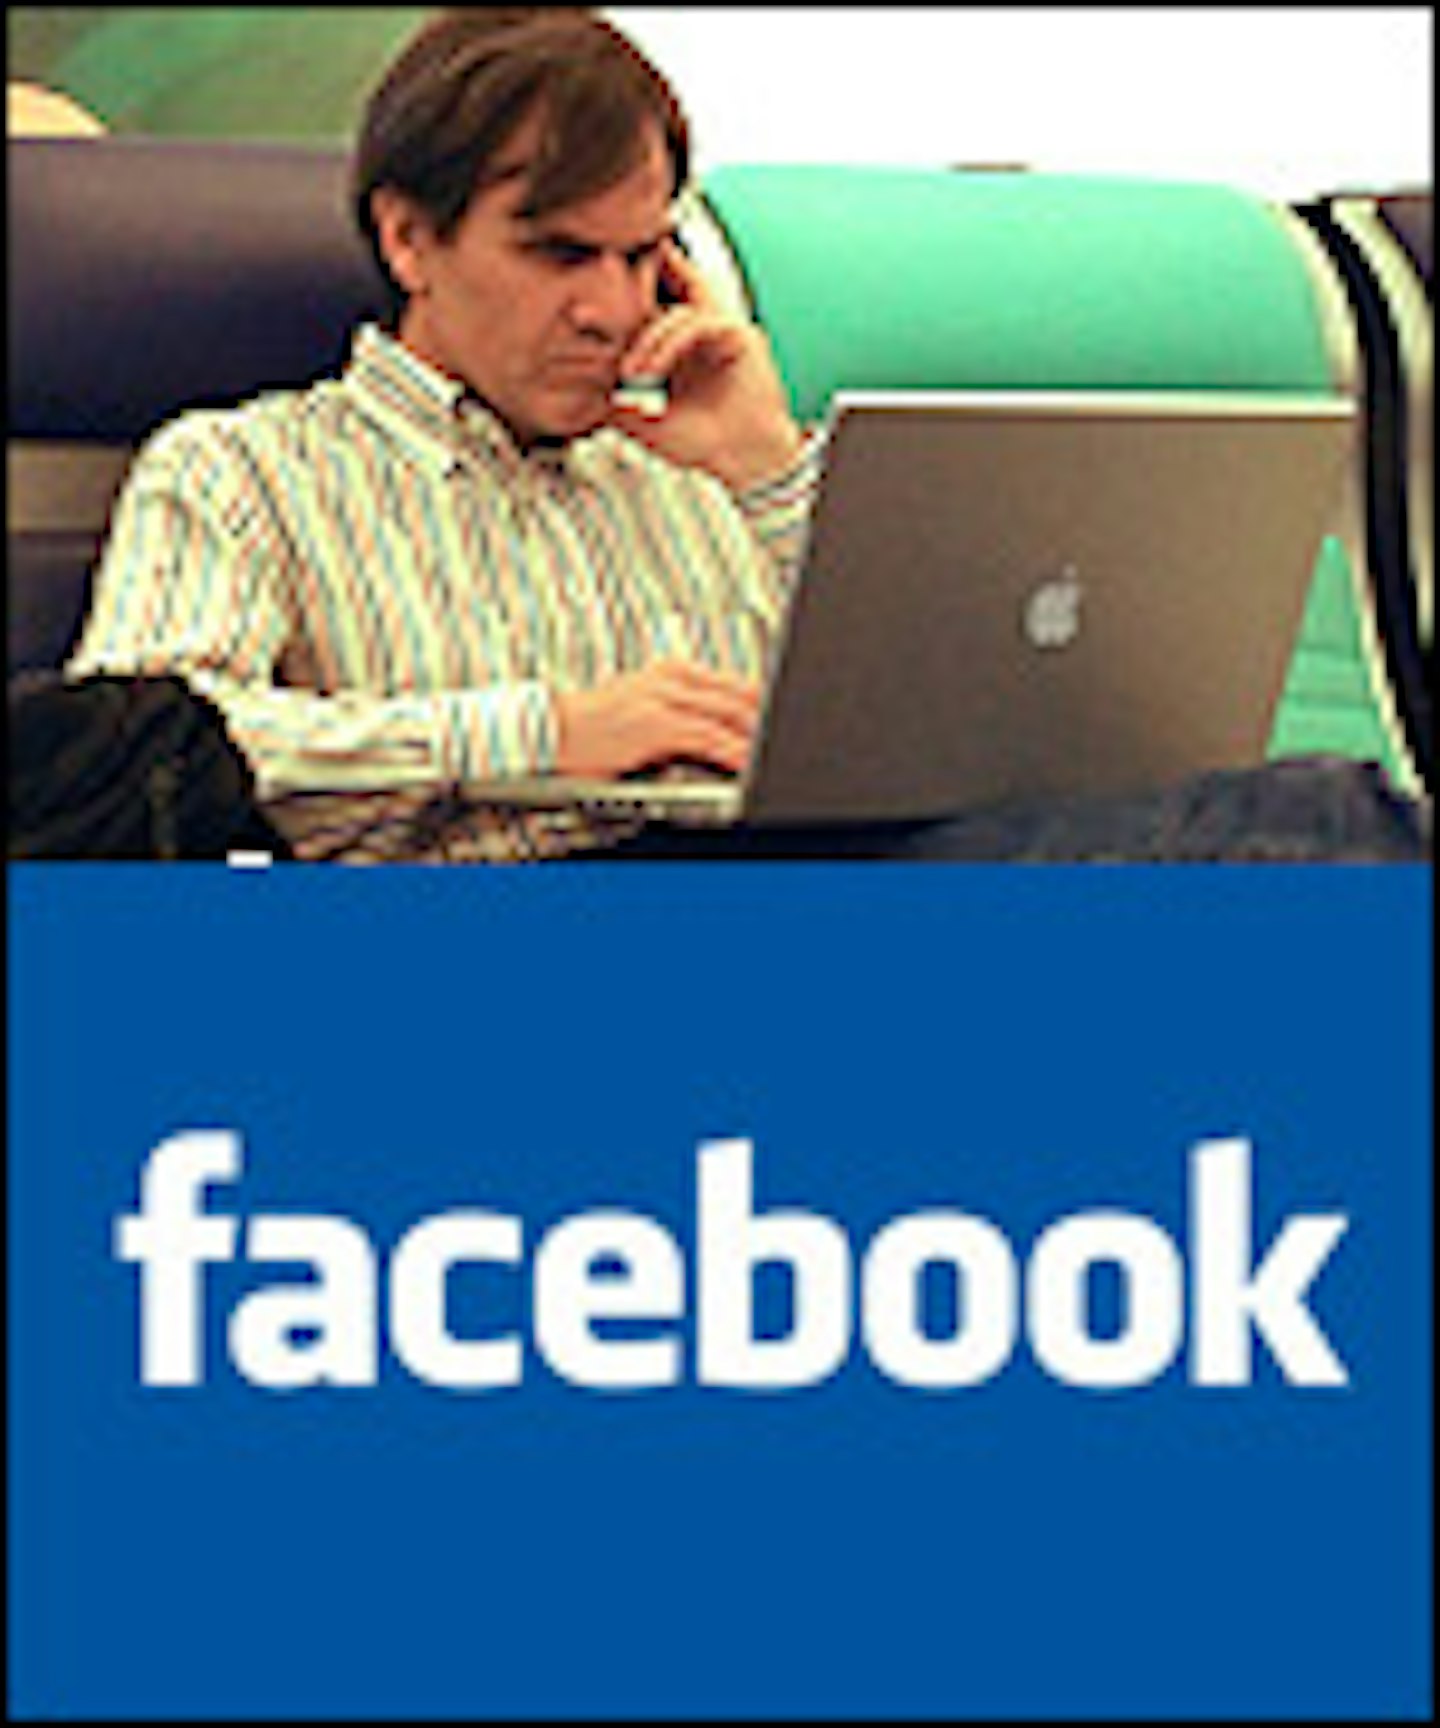 Get Ready For Facebook: The Movie